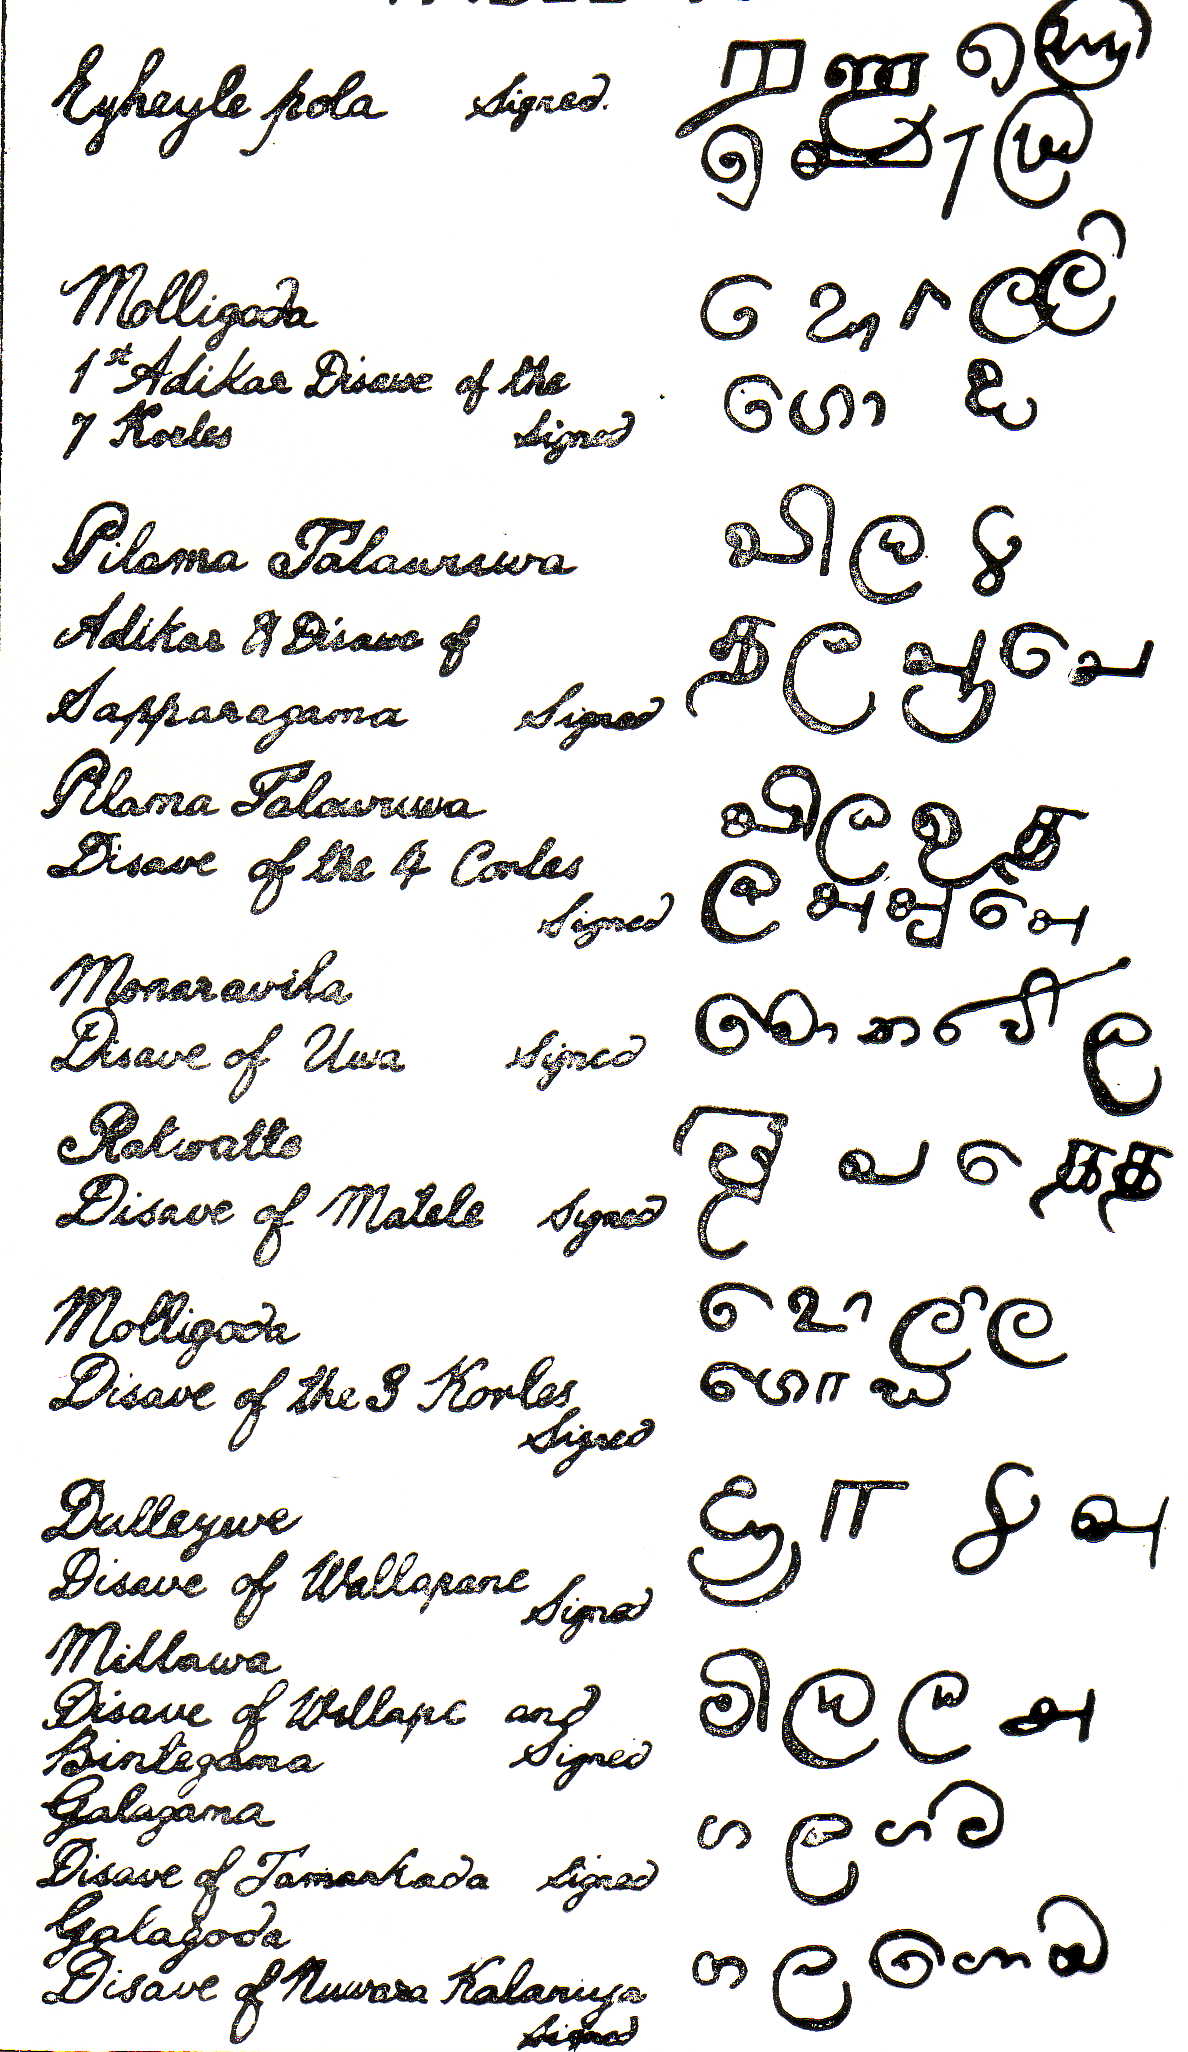 http://sangam.org/wp-content/uploads/2015/03/Signatures-of-11-Sinhalese-Chiefs-in-1815-Document.jpg